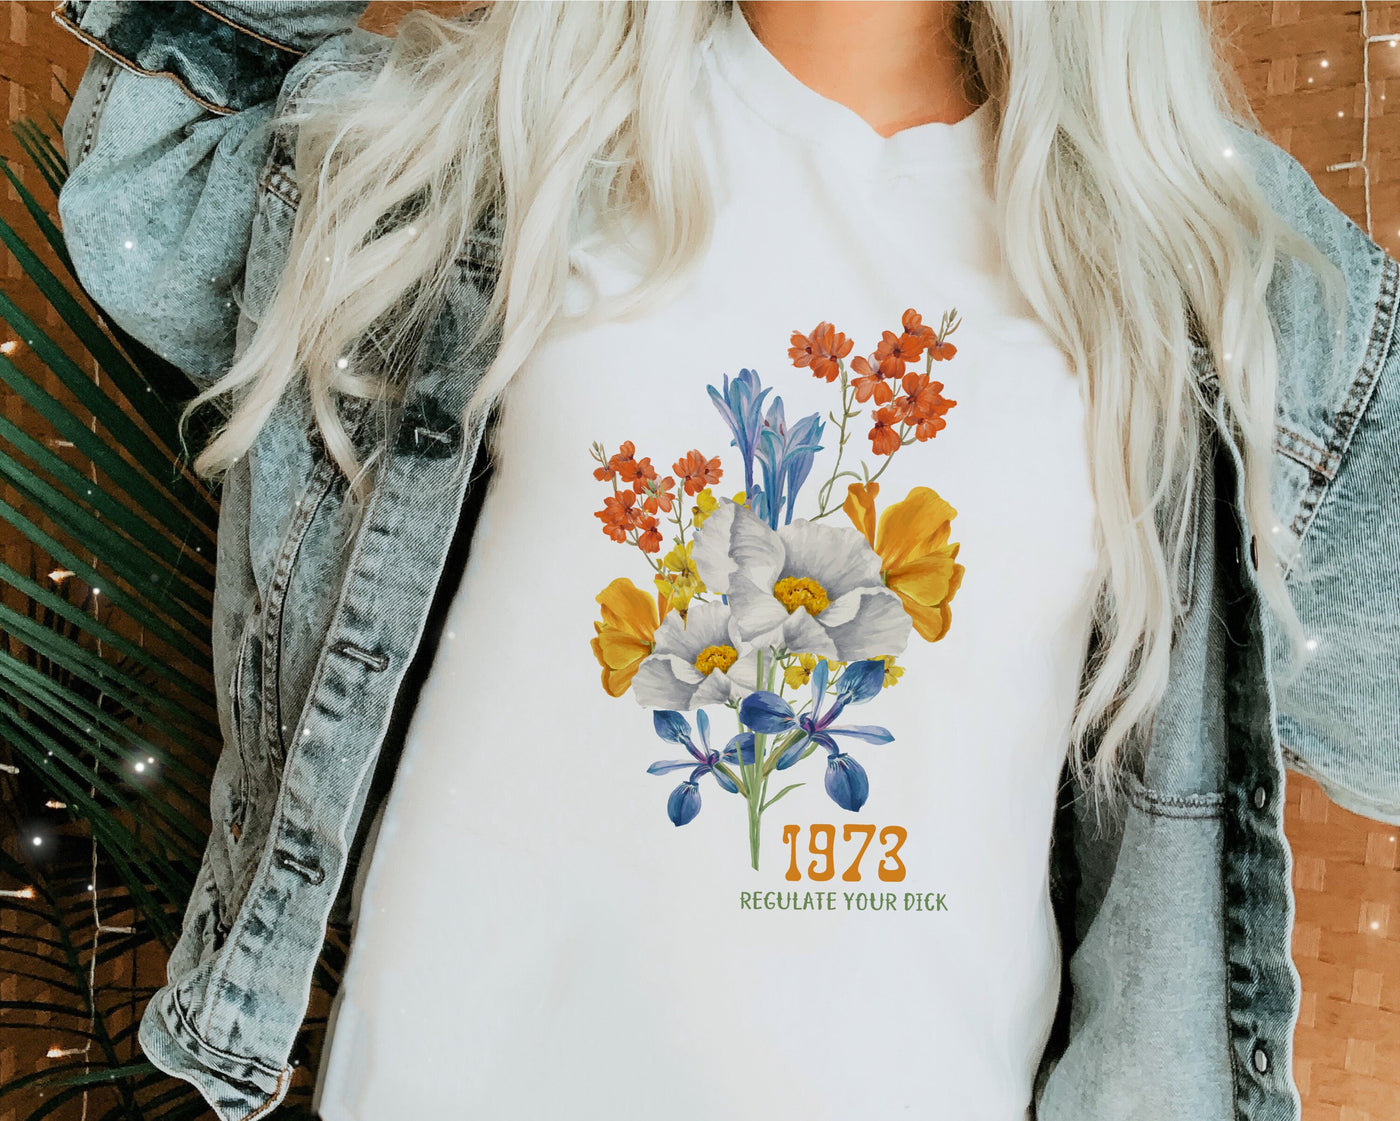 1973, Protect Roe, Social Justice, Pro Choice, Women's Equality Shirt, Women's Rights T Shirt, Cute Boho Shirt, Floral T Shirt, Feminist Tee